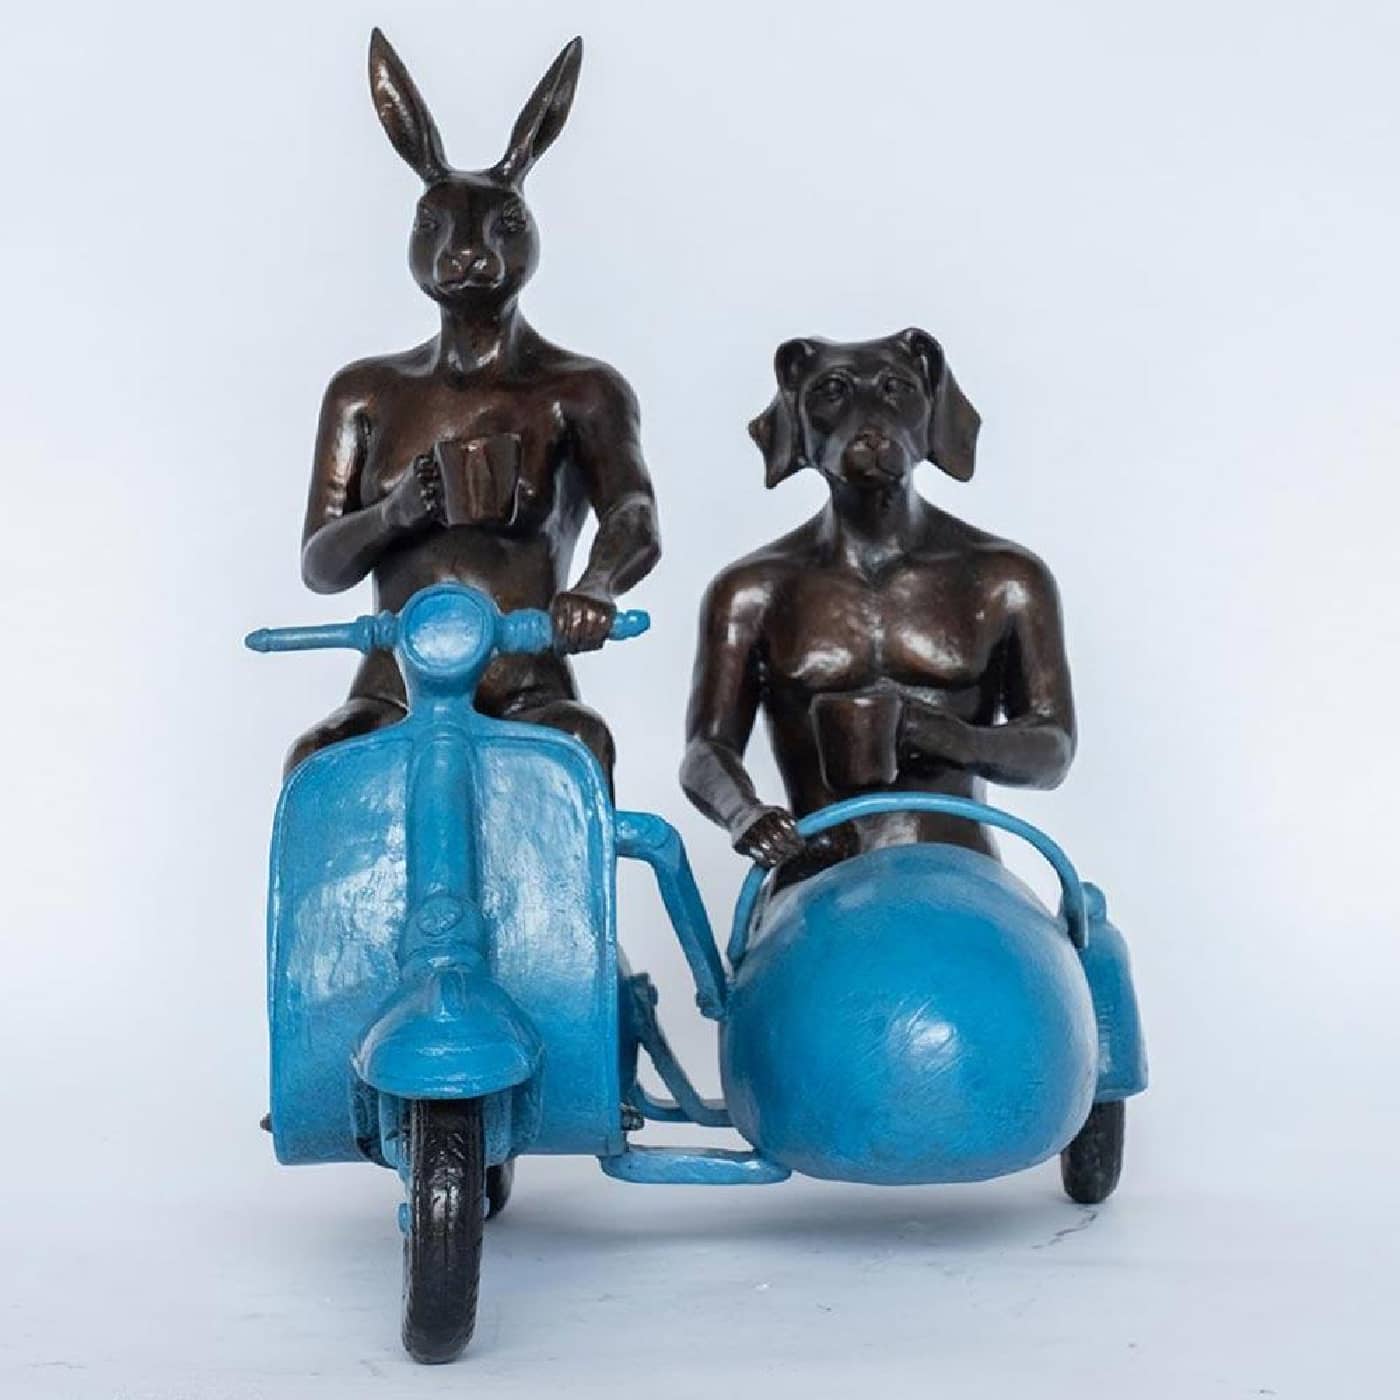 Gillie and Marc Sculpture (Bronze) ~ 'They Were Always Side by Side (Blue)' - Curate Art & Design Gallery Sorrento Mornington Peninsula Melbourne